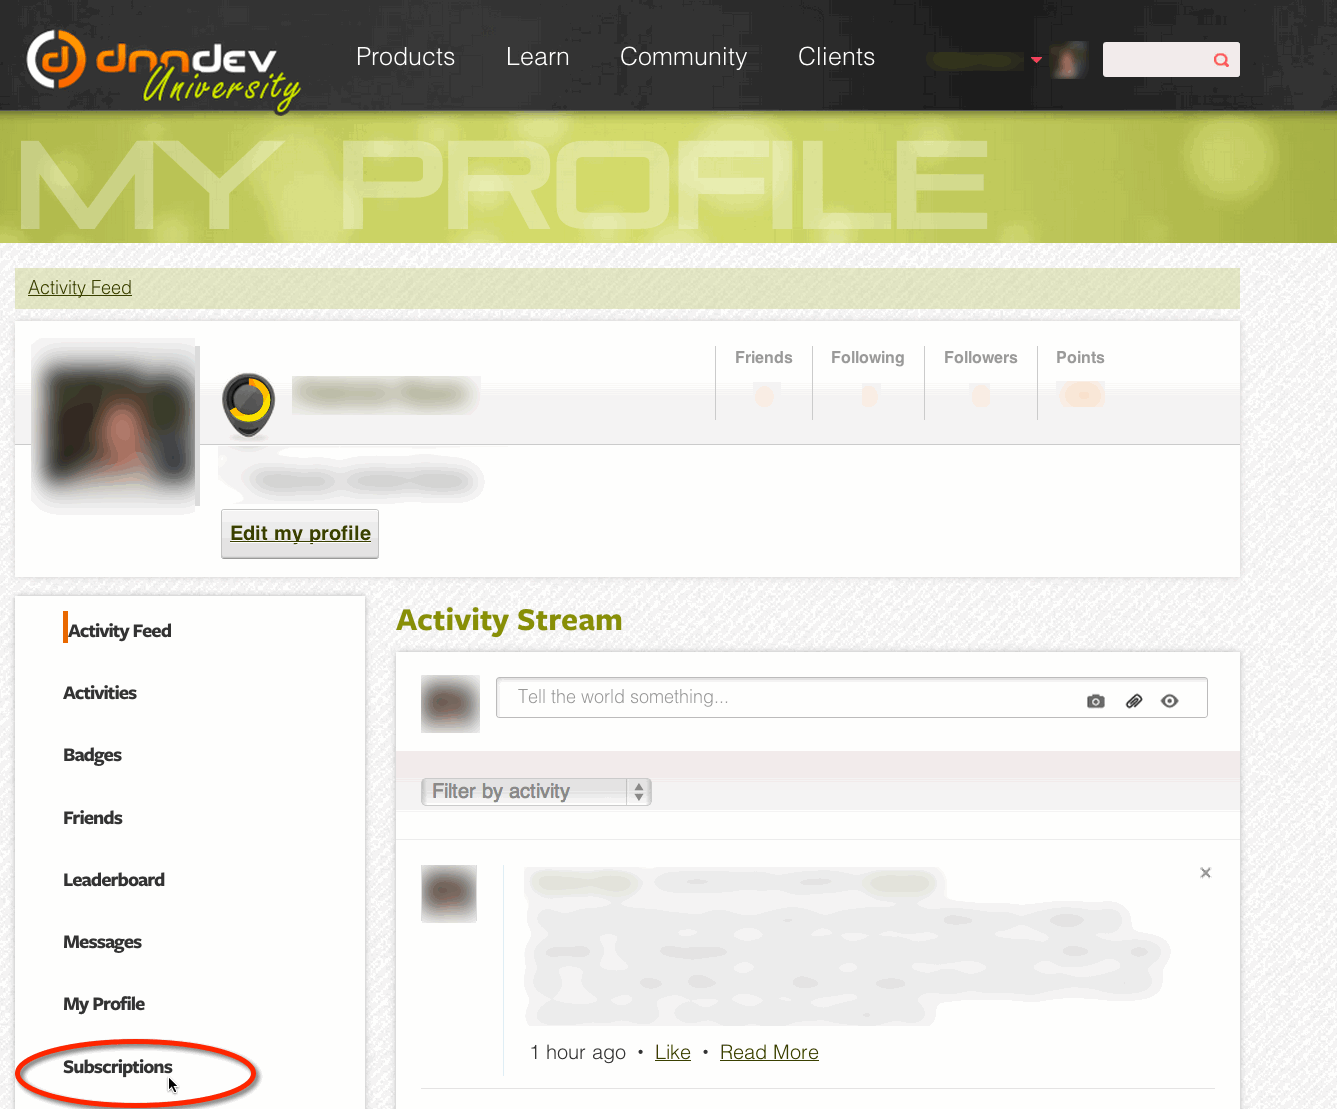 Select Subscriptions from the menu